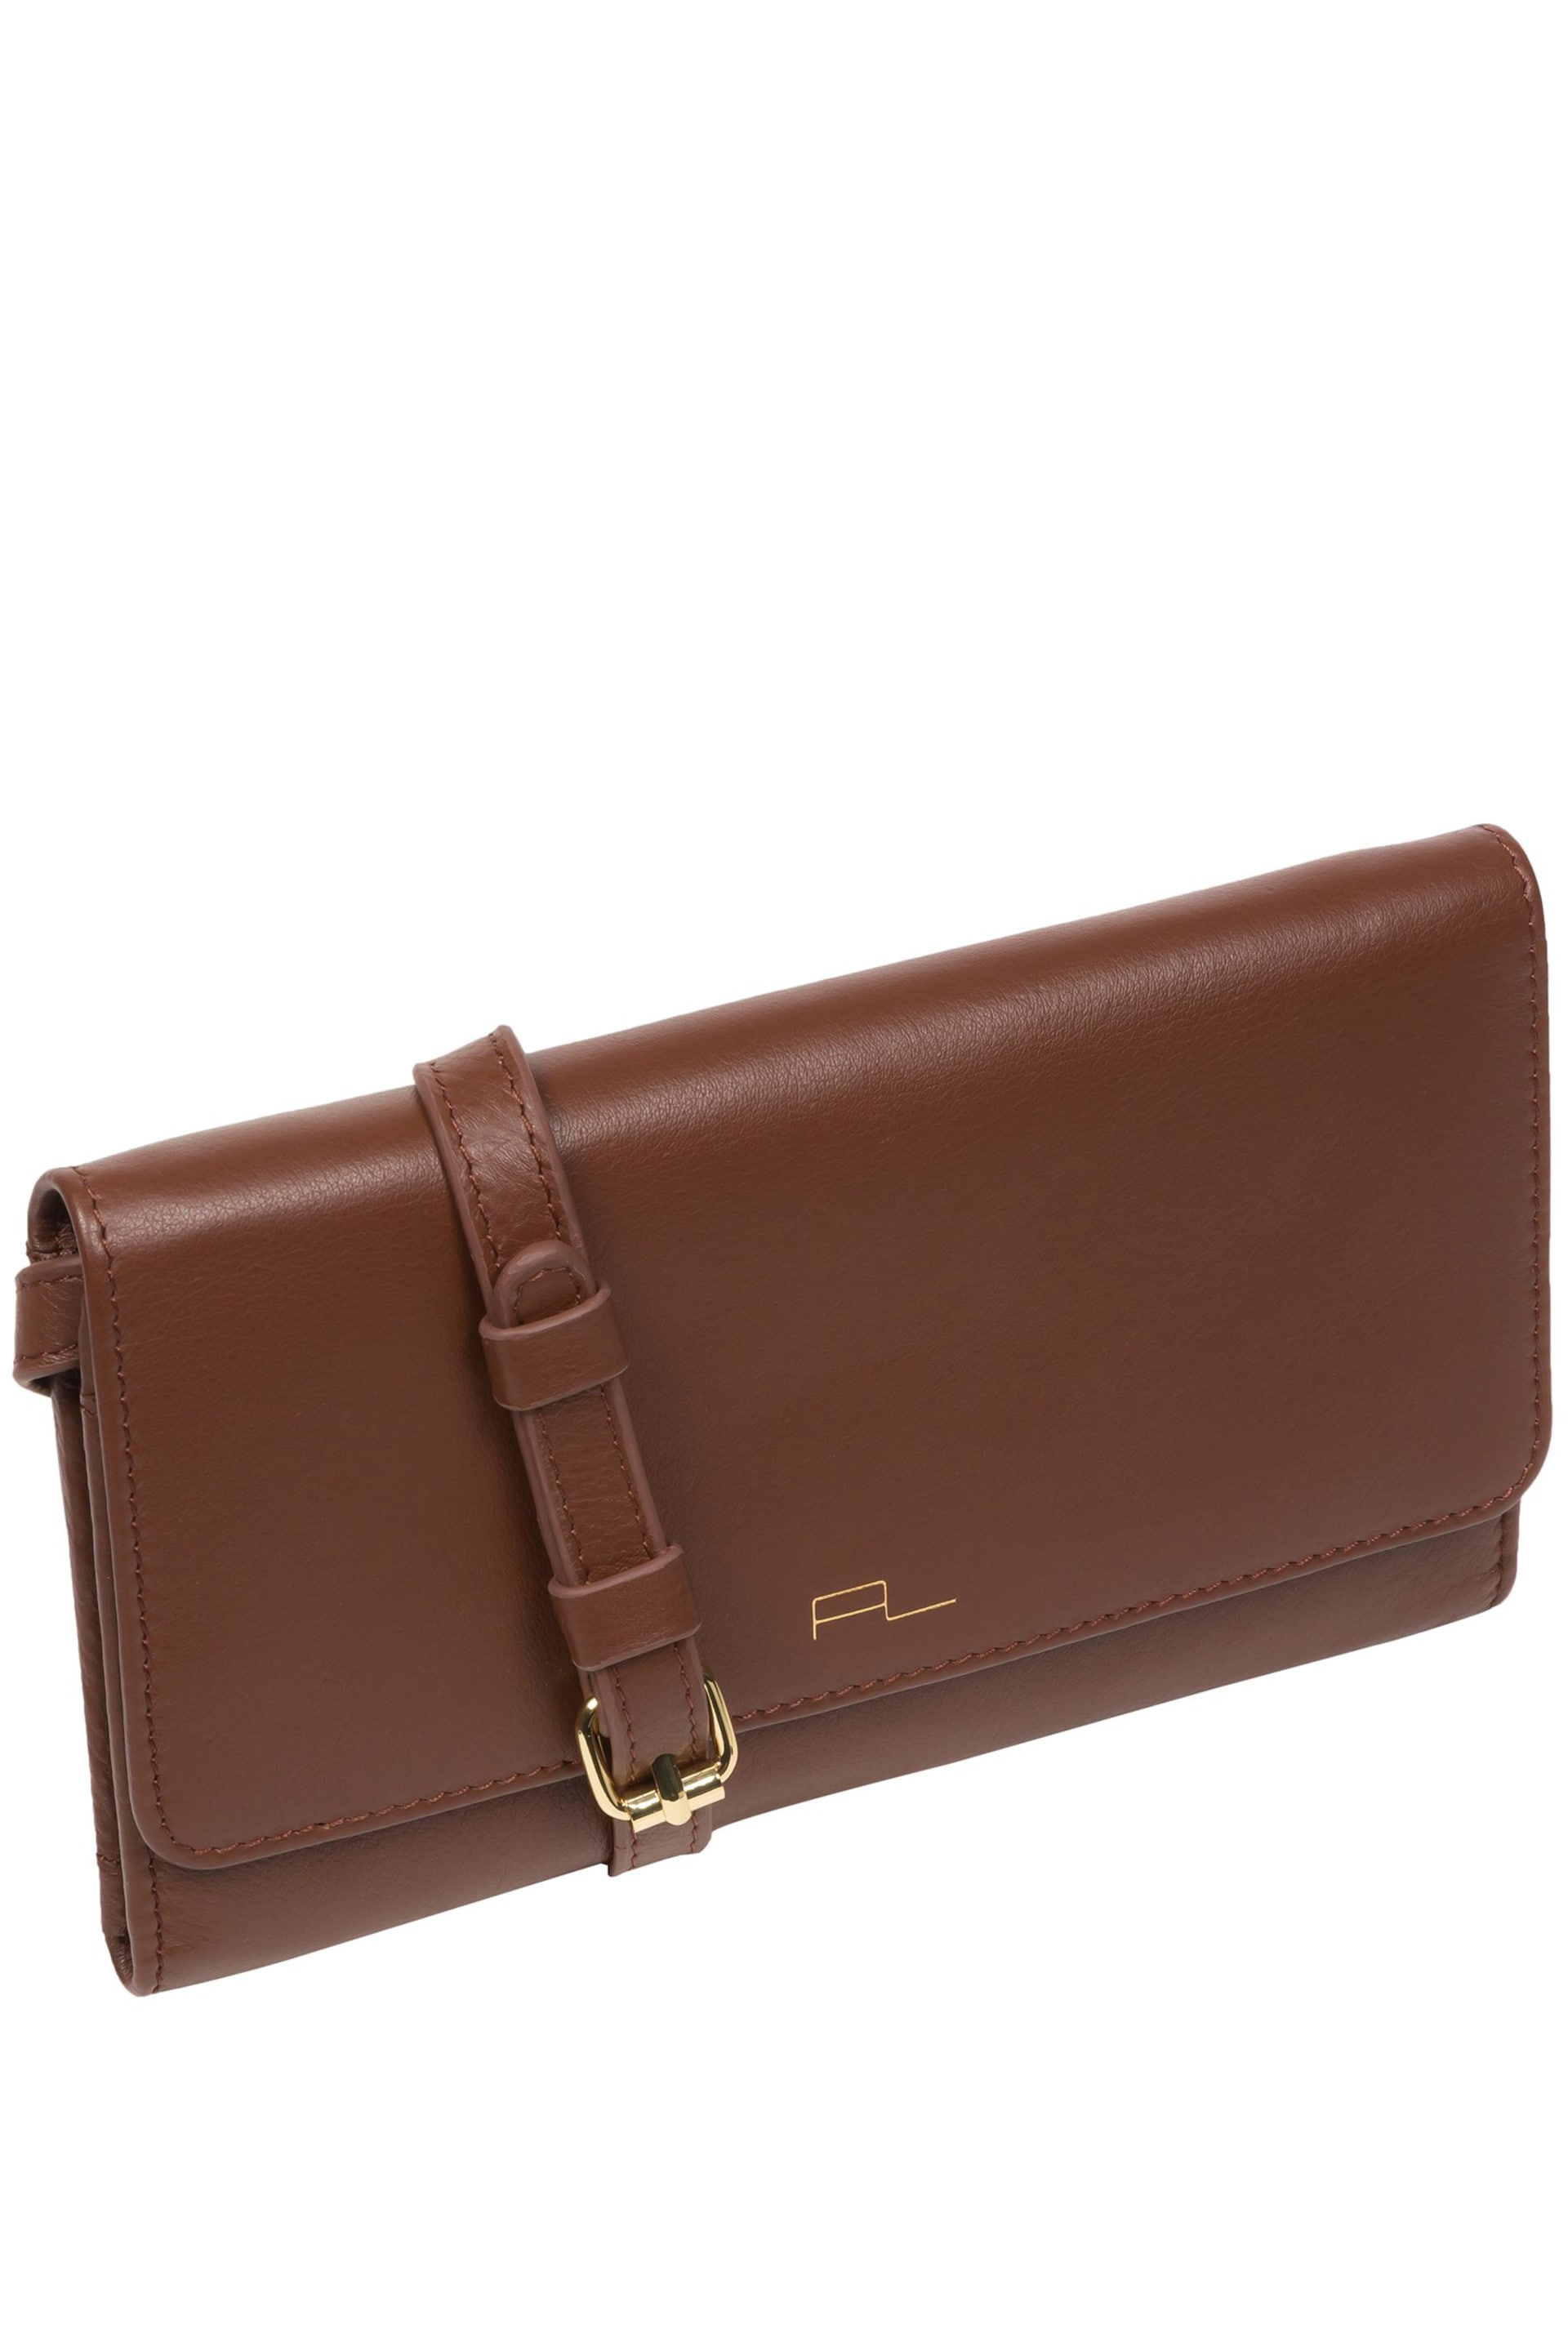 Pure Luxuries London Saffron Nappa Leather Cross-Body Clutch Bag - Image 6 of 7